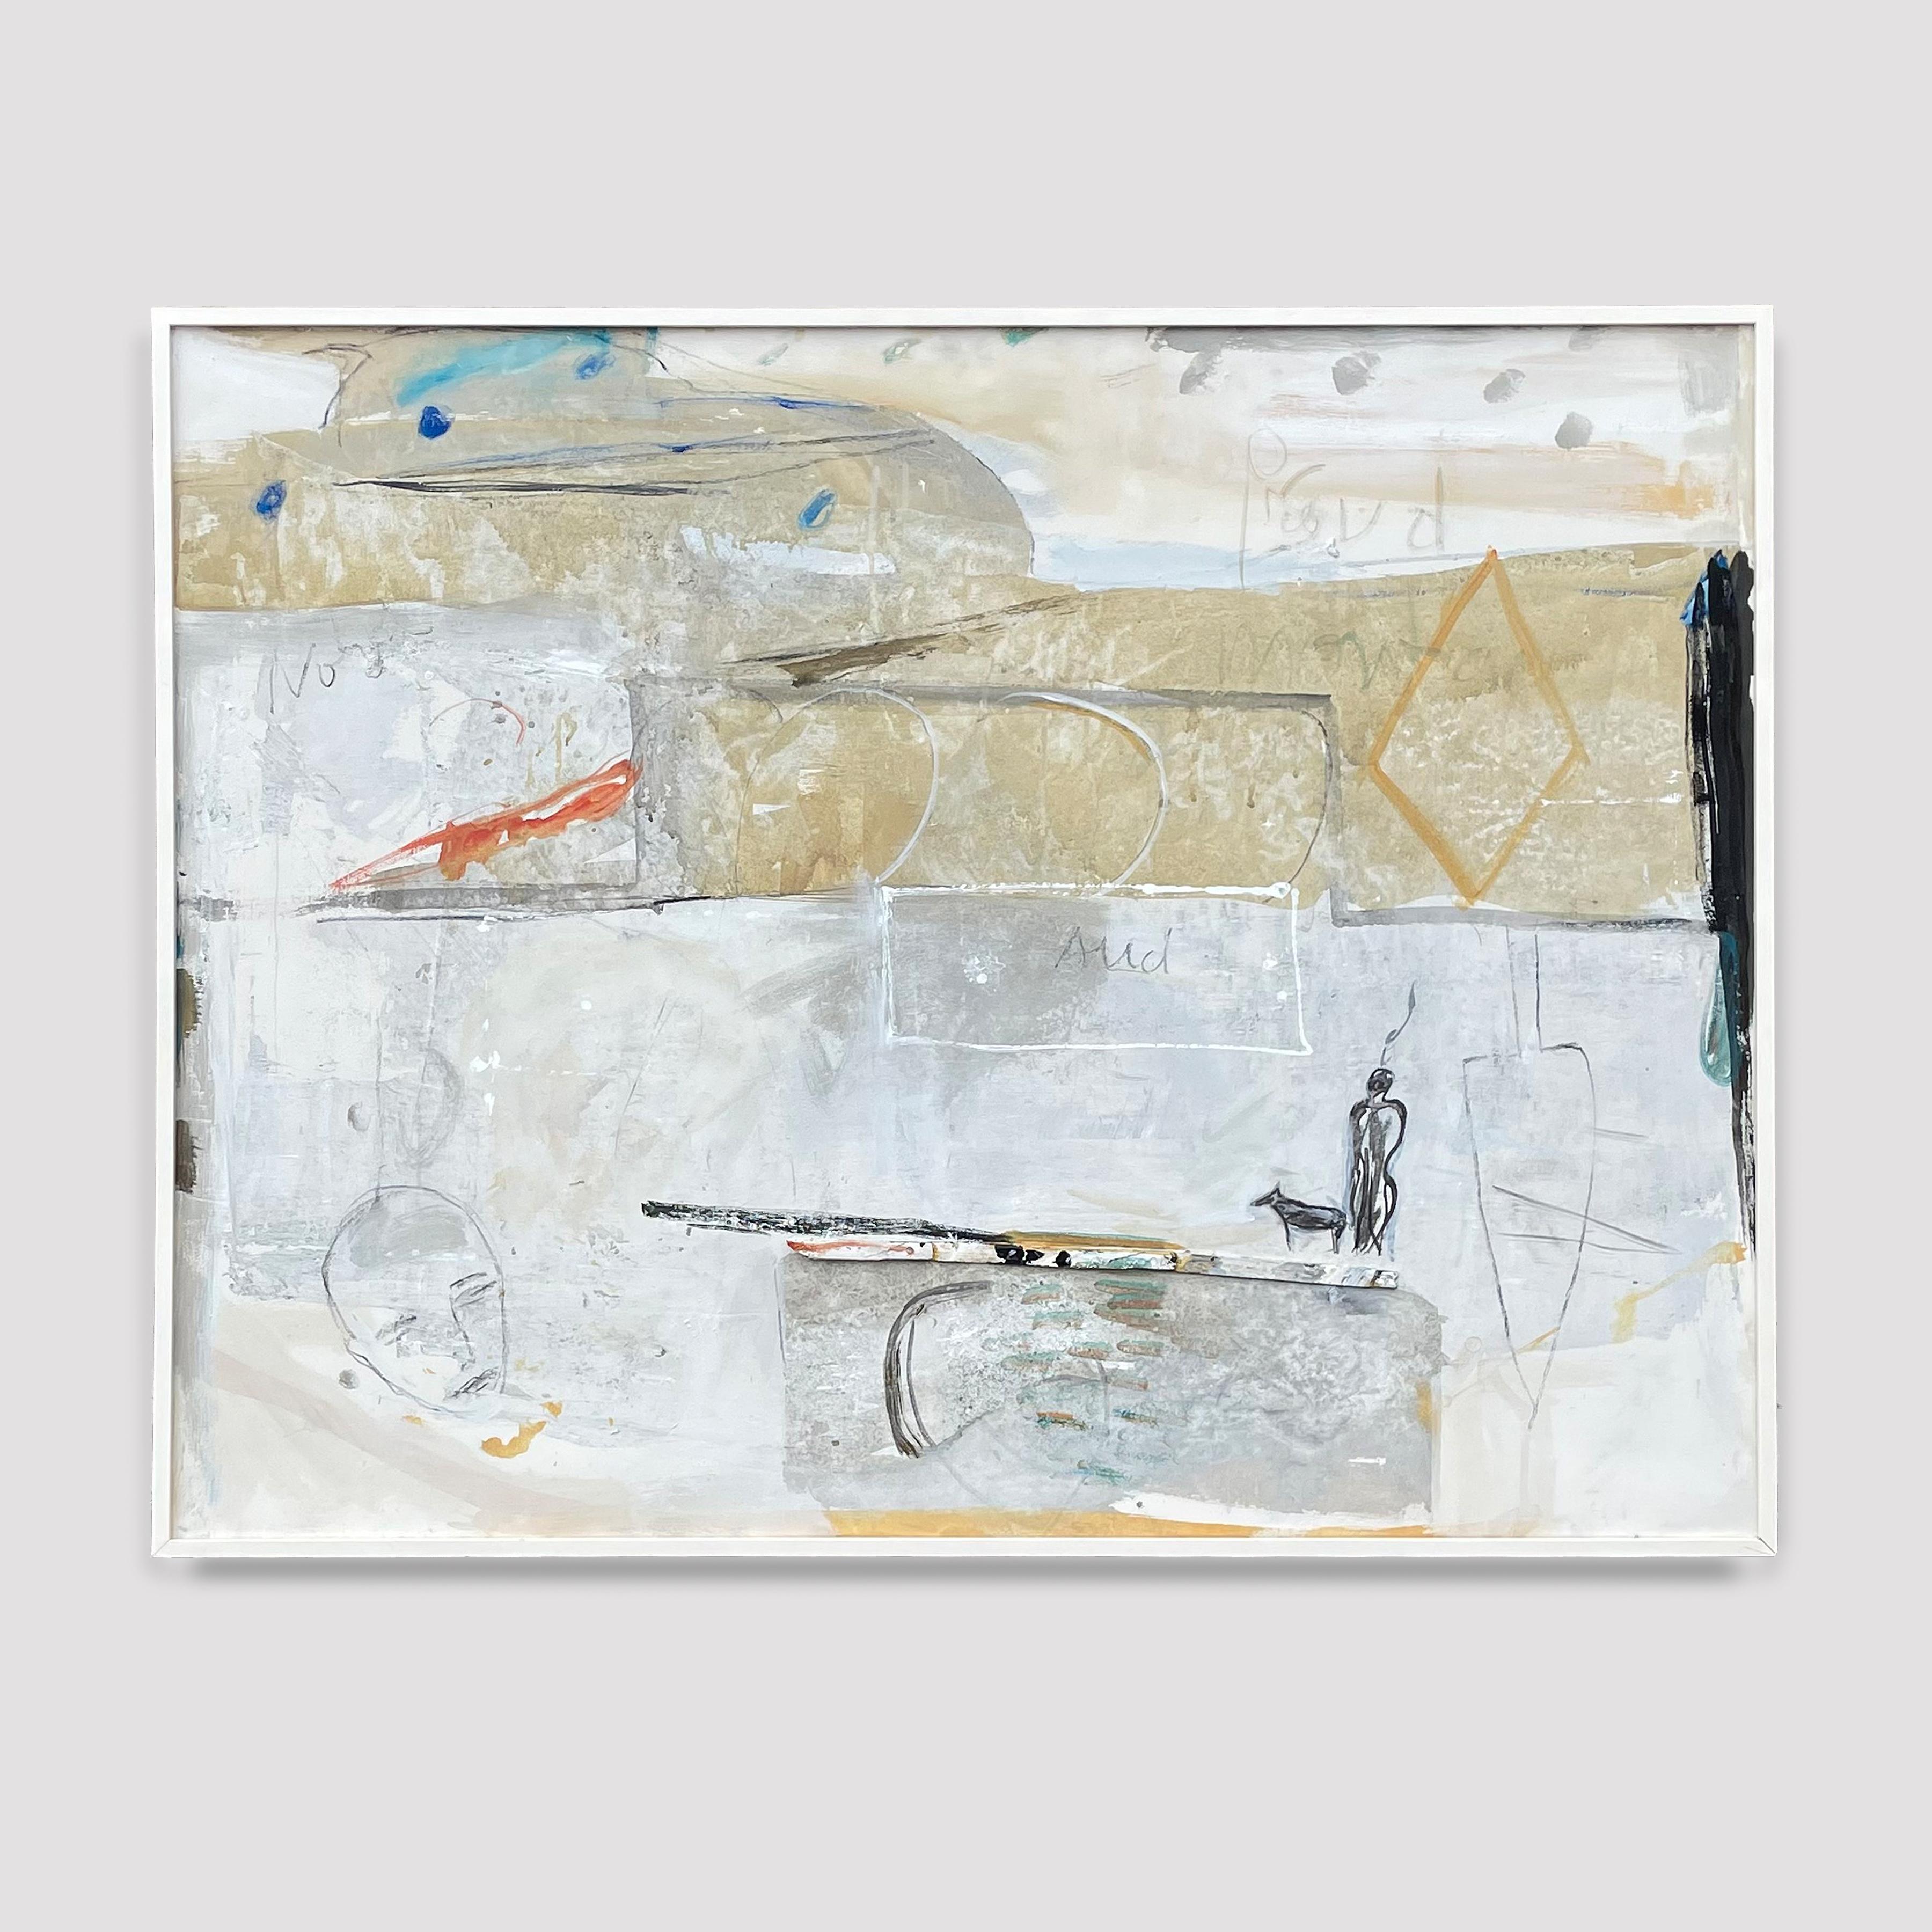 This sophisticated abstraction by Columbian artist Alban Alleegro (b. 1957) is enigmatic and ethereal as it shifts from non-objective abstract passages to fleeting hints of vague imagery.

A delight to live with as it unveils more of its